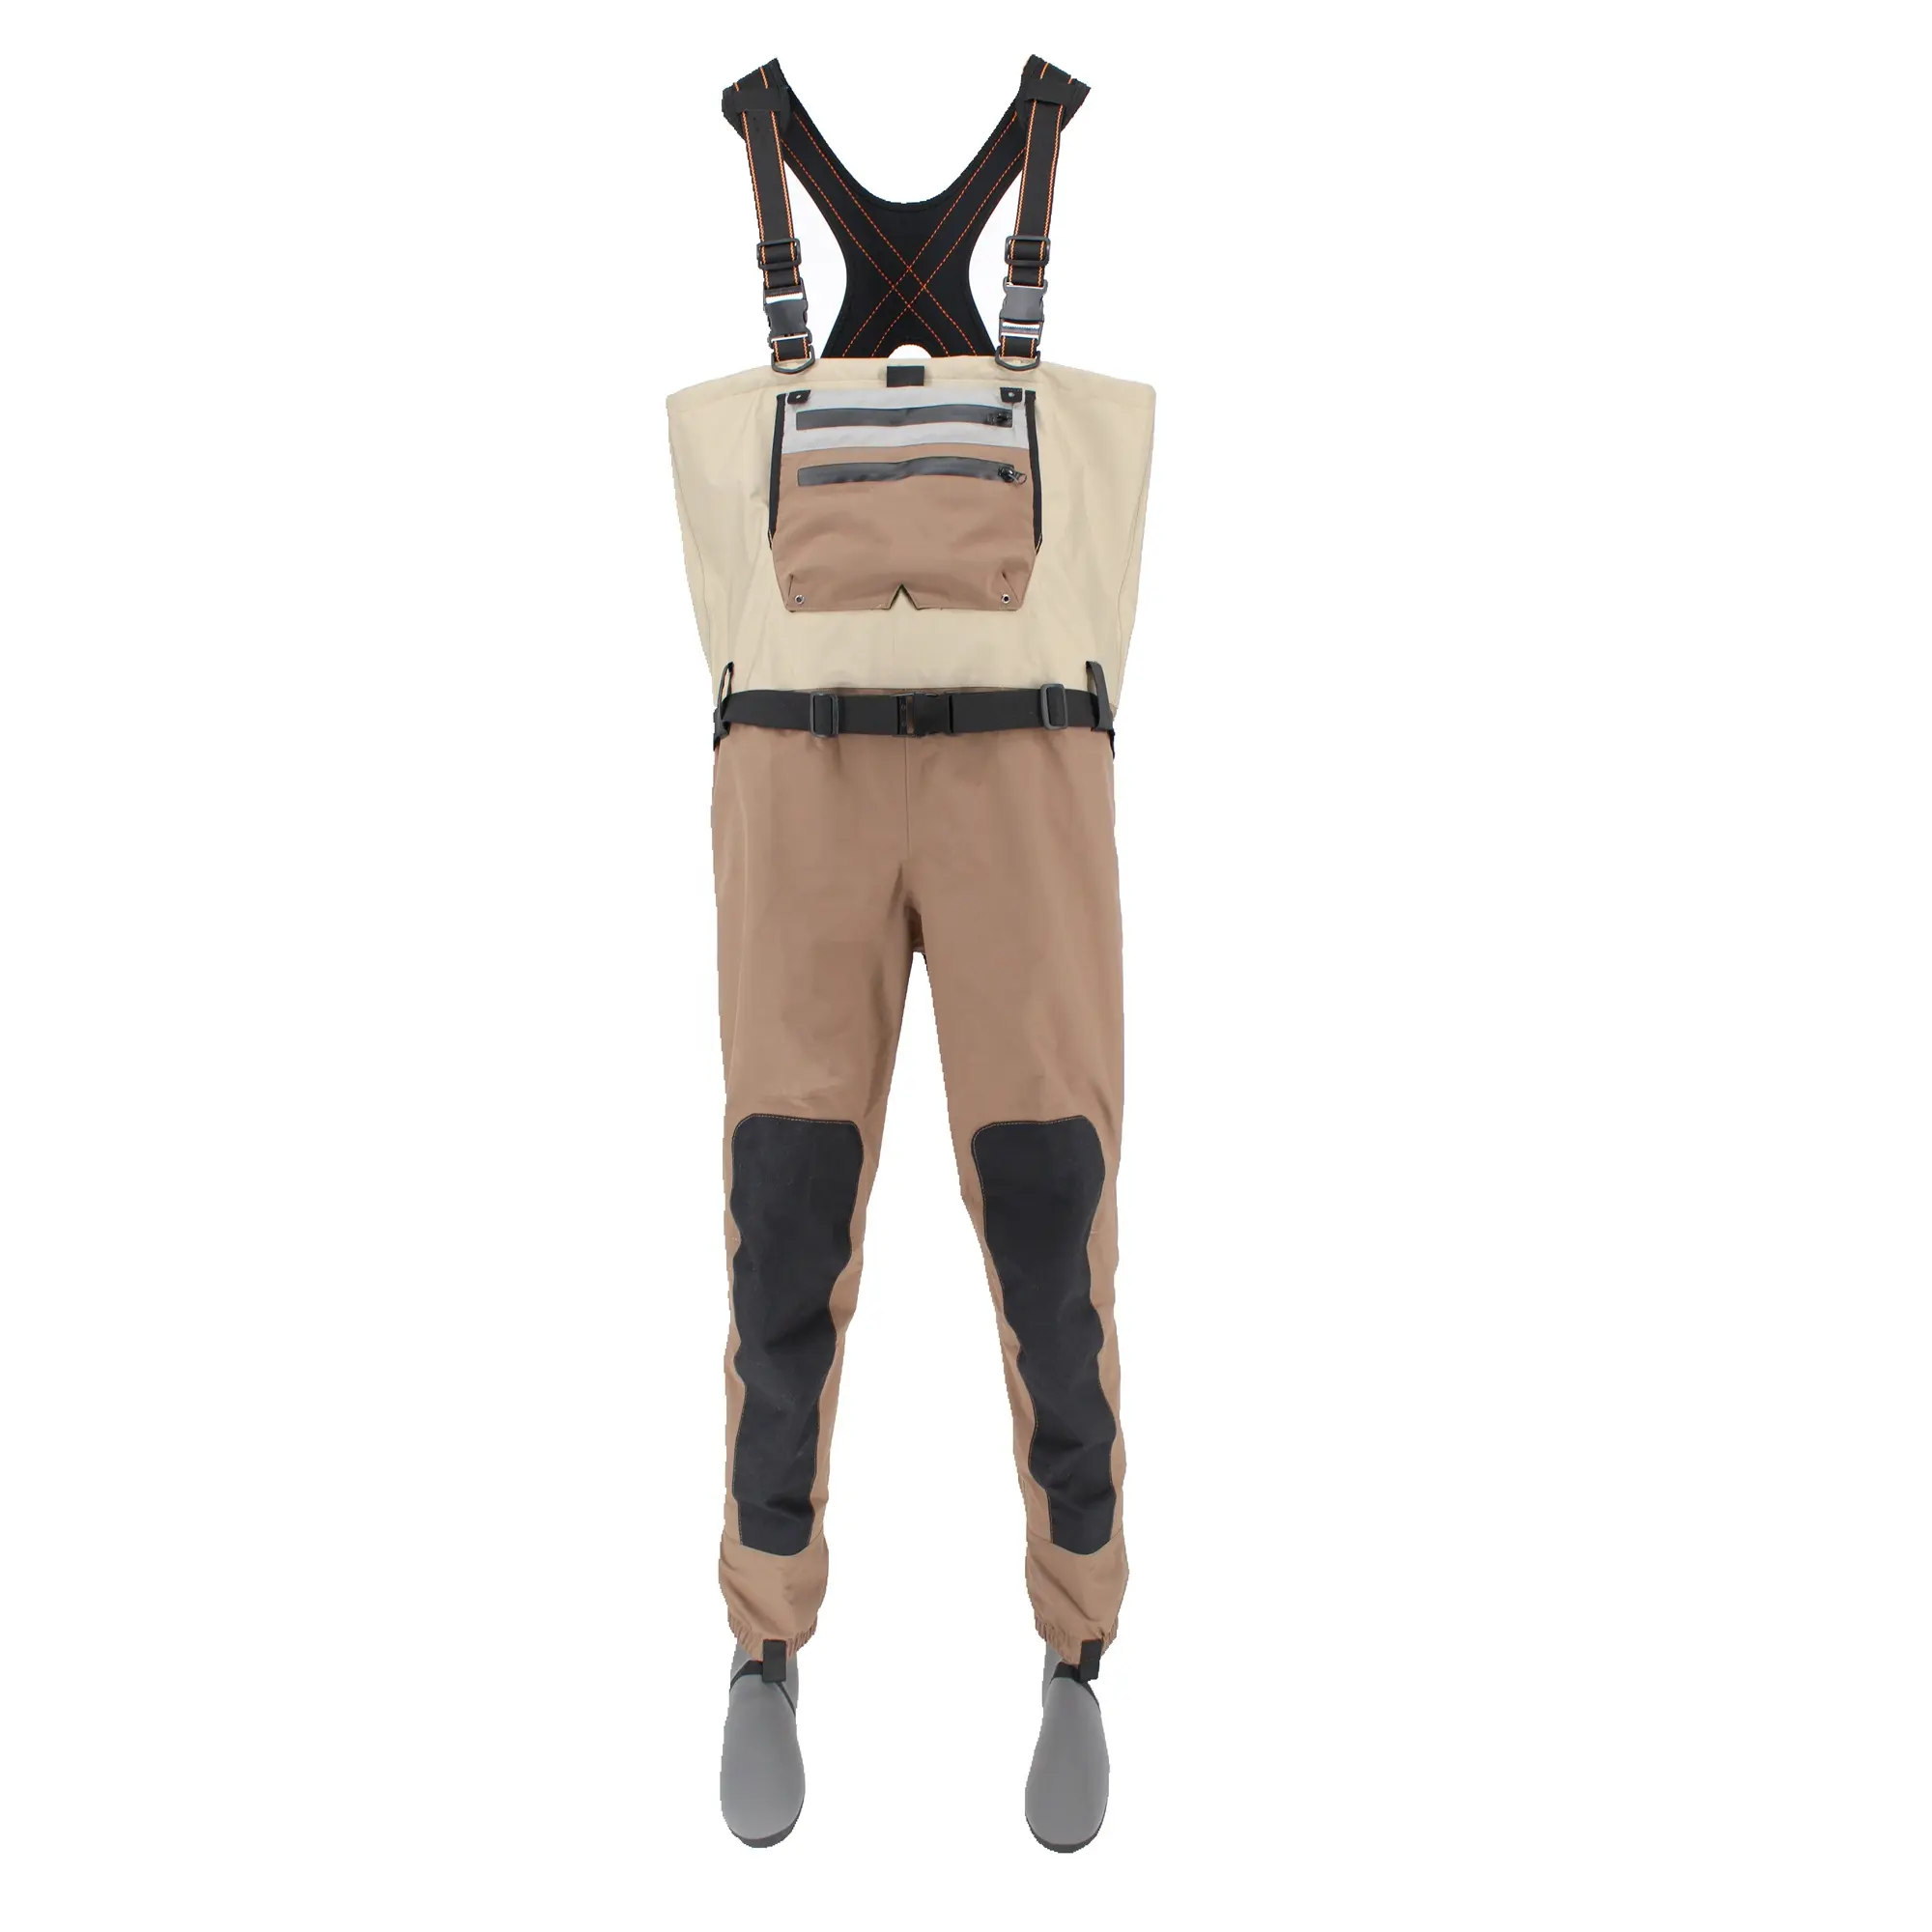 Waterproof Fishing & Hunting Breathable Waders for Men and Women